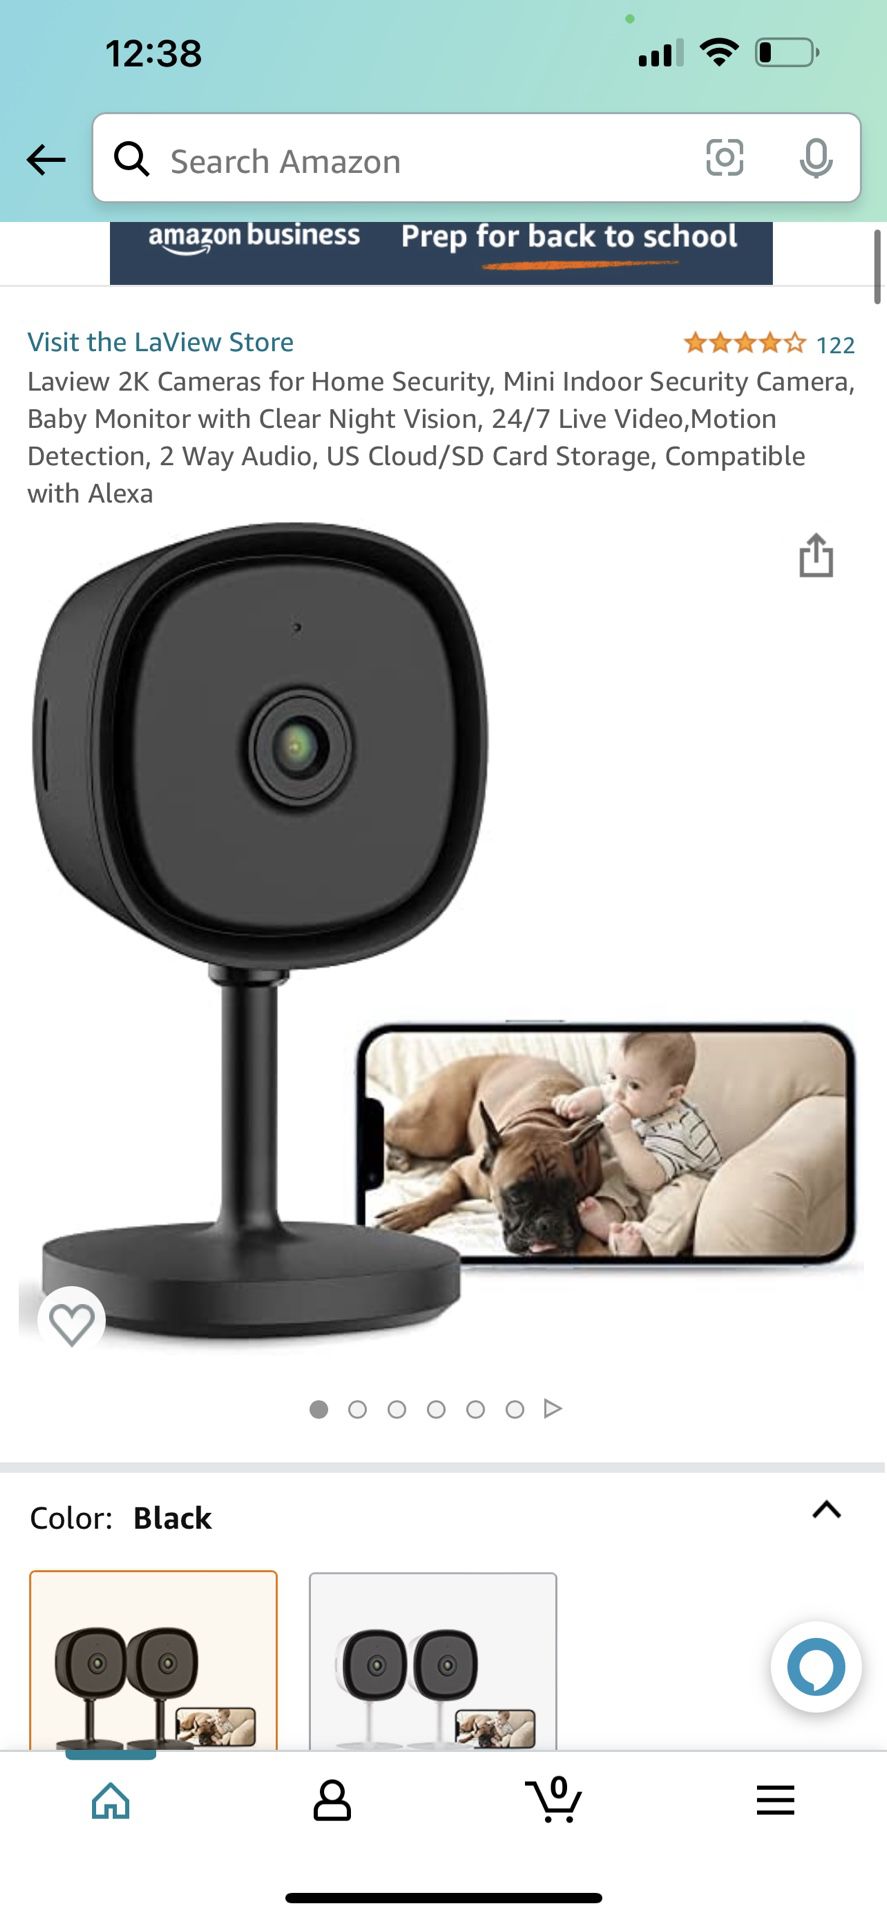 Laview 2K Cameras for Home Security, Mini Indoor Security Camera, Baby Monitor with Clear Night Vision, 24/7 Live Video,Motion Detection, 2 Way Audio,